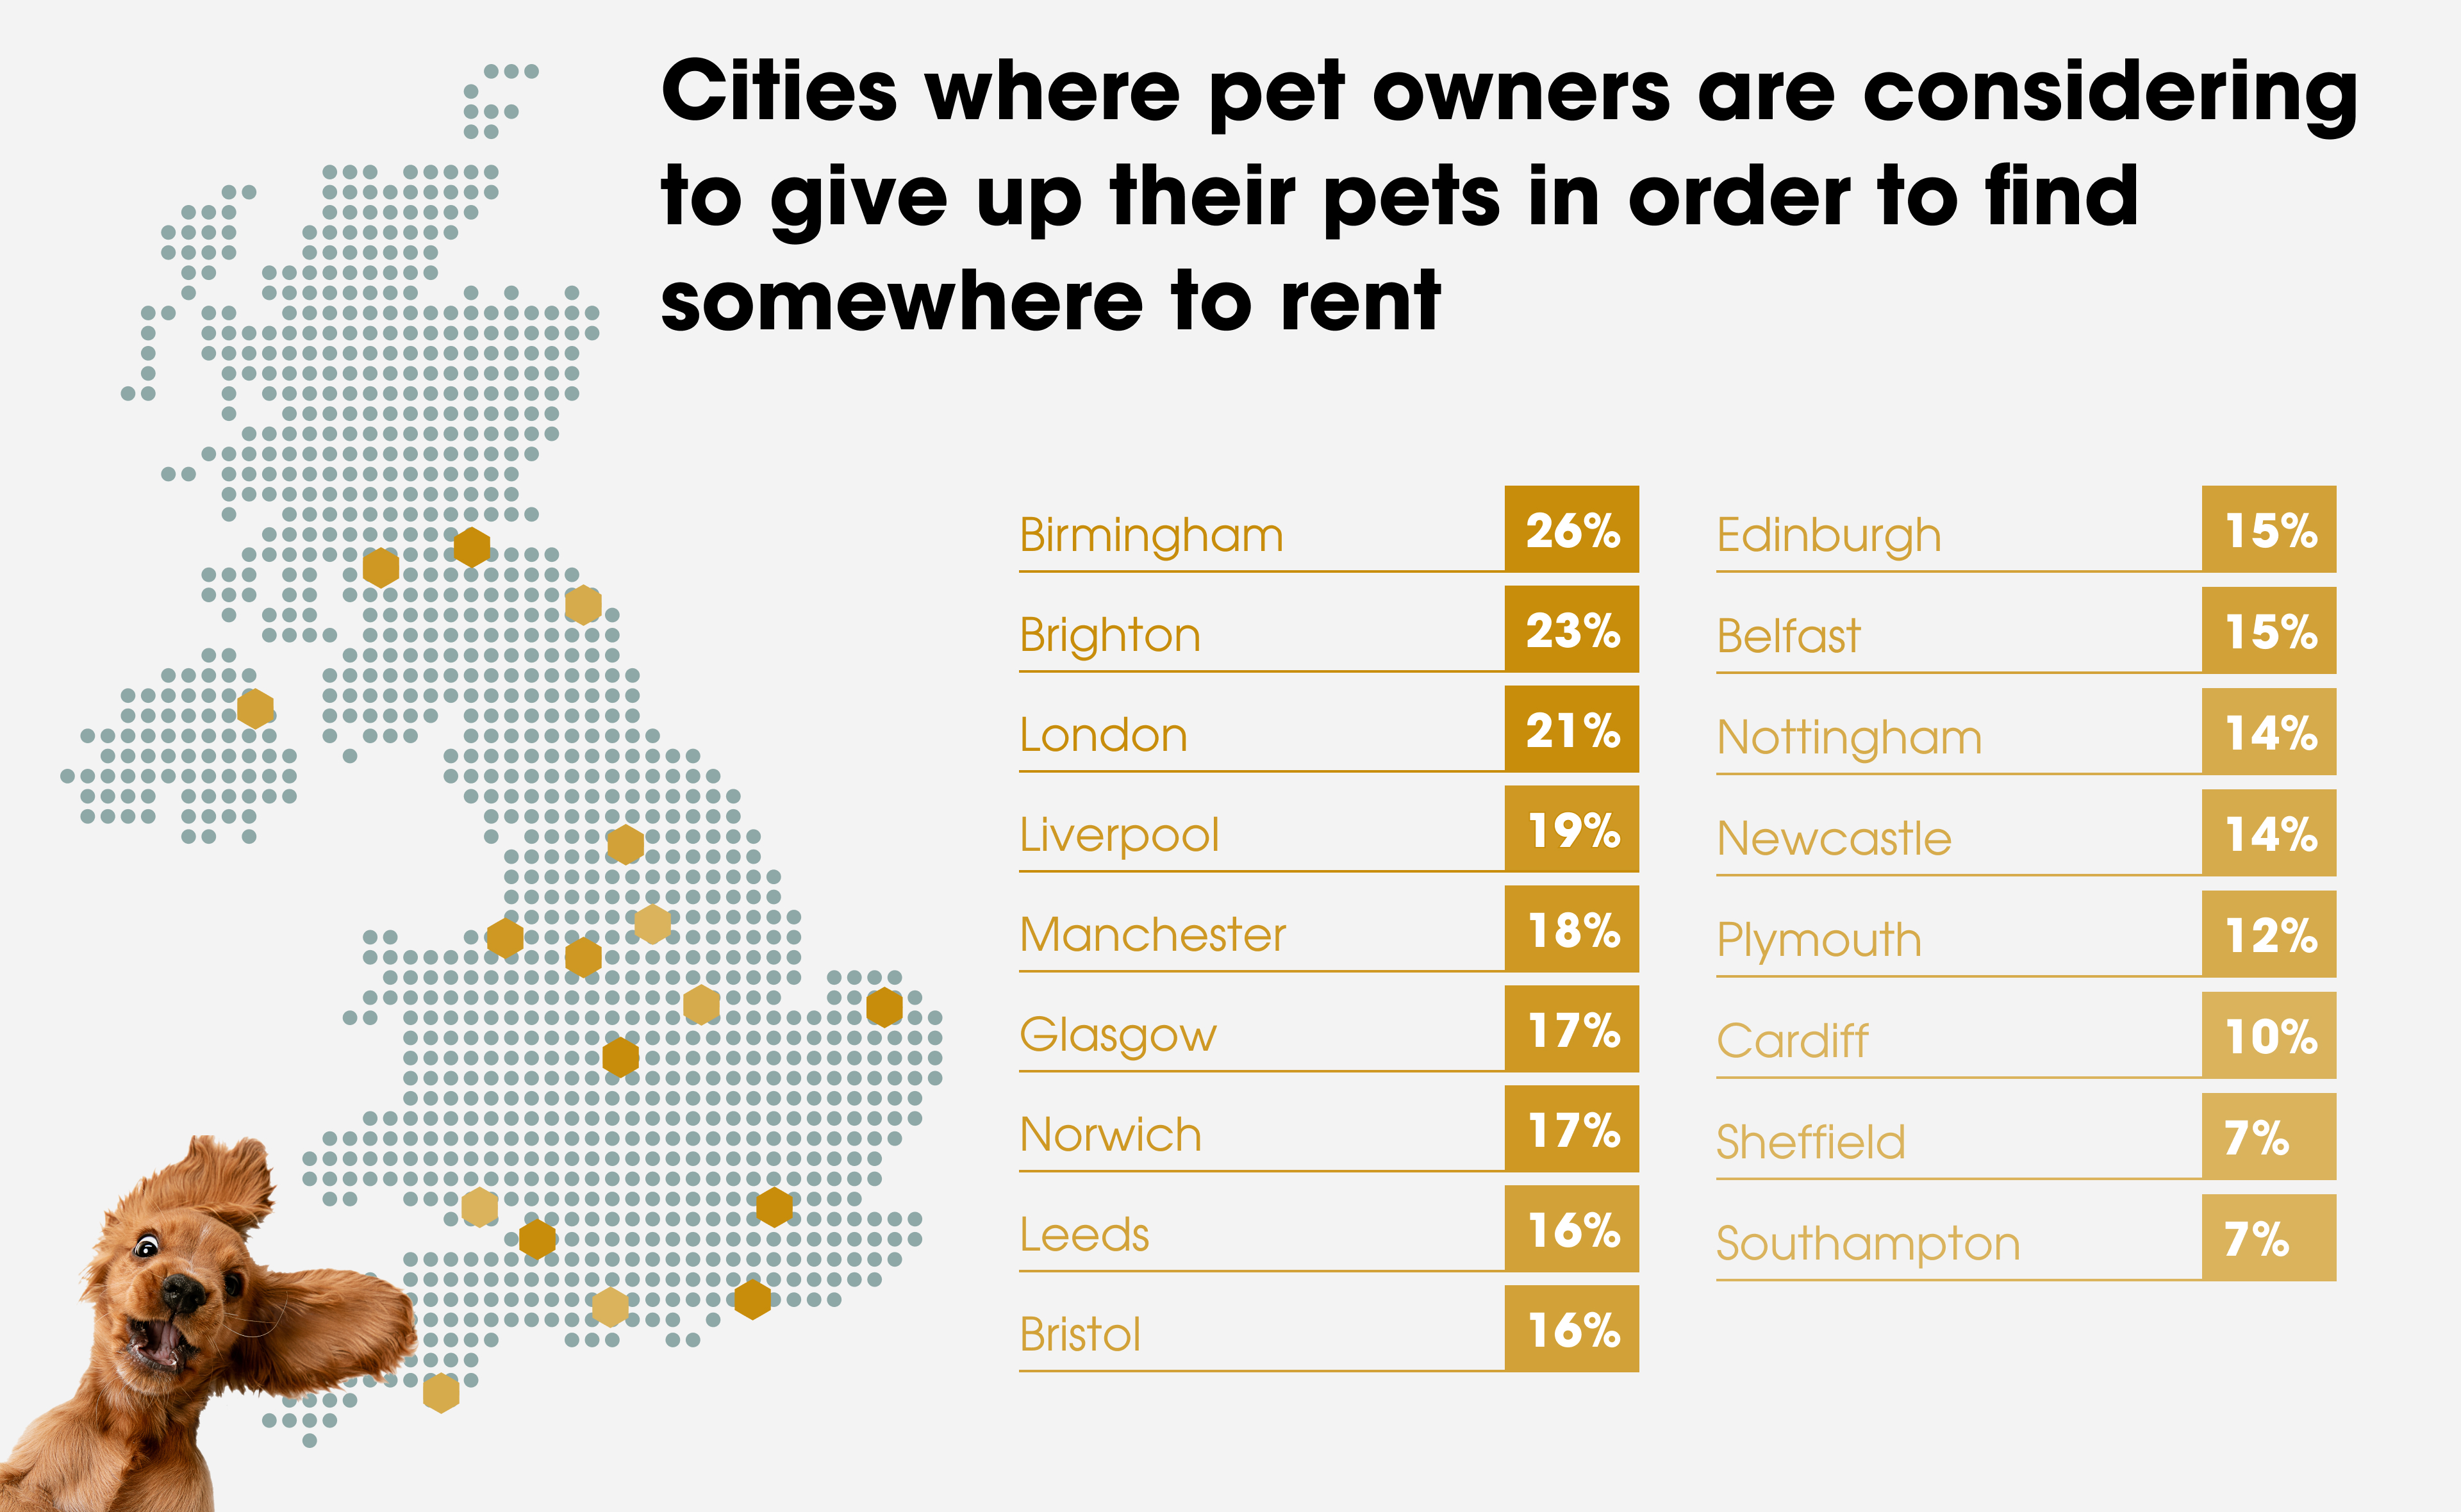 Cities where pet owners are considering to give up their pets in order to find somewhere to rent